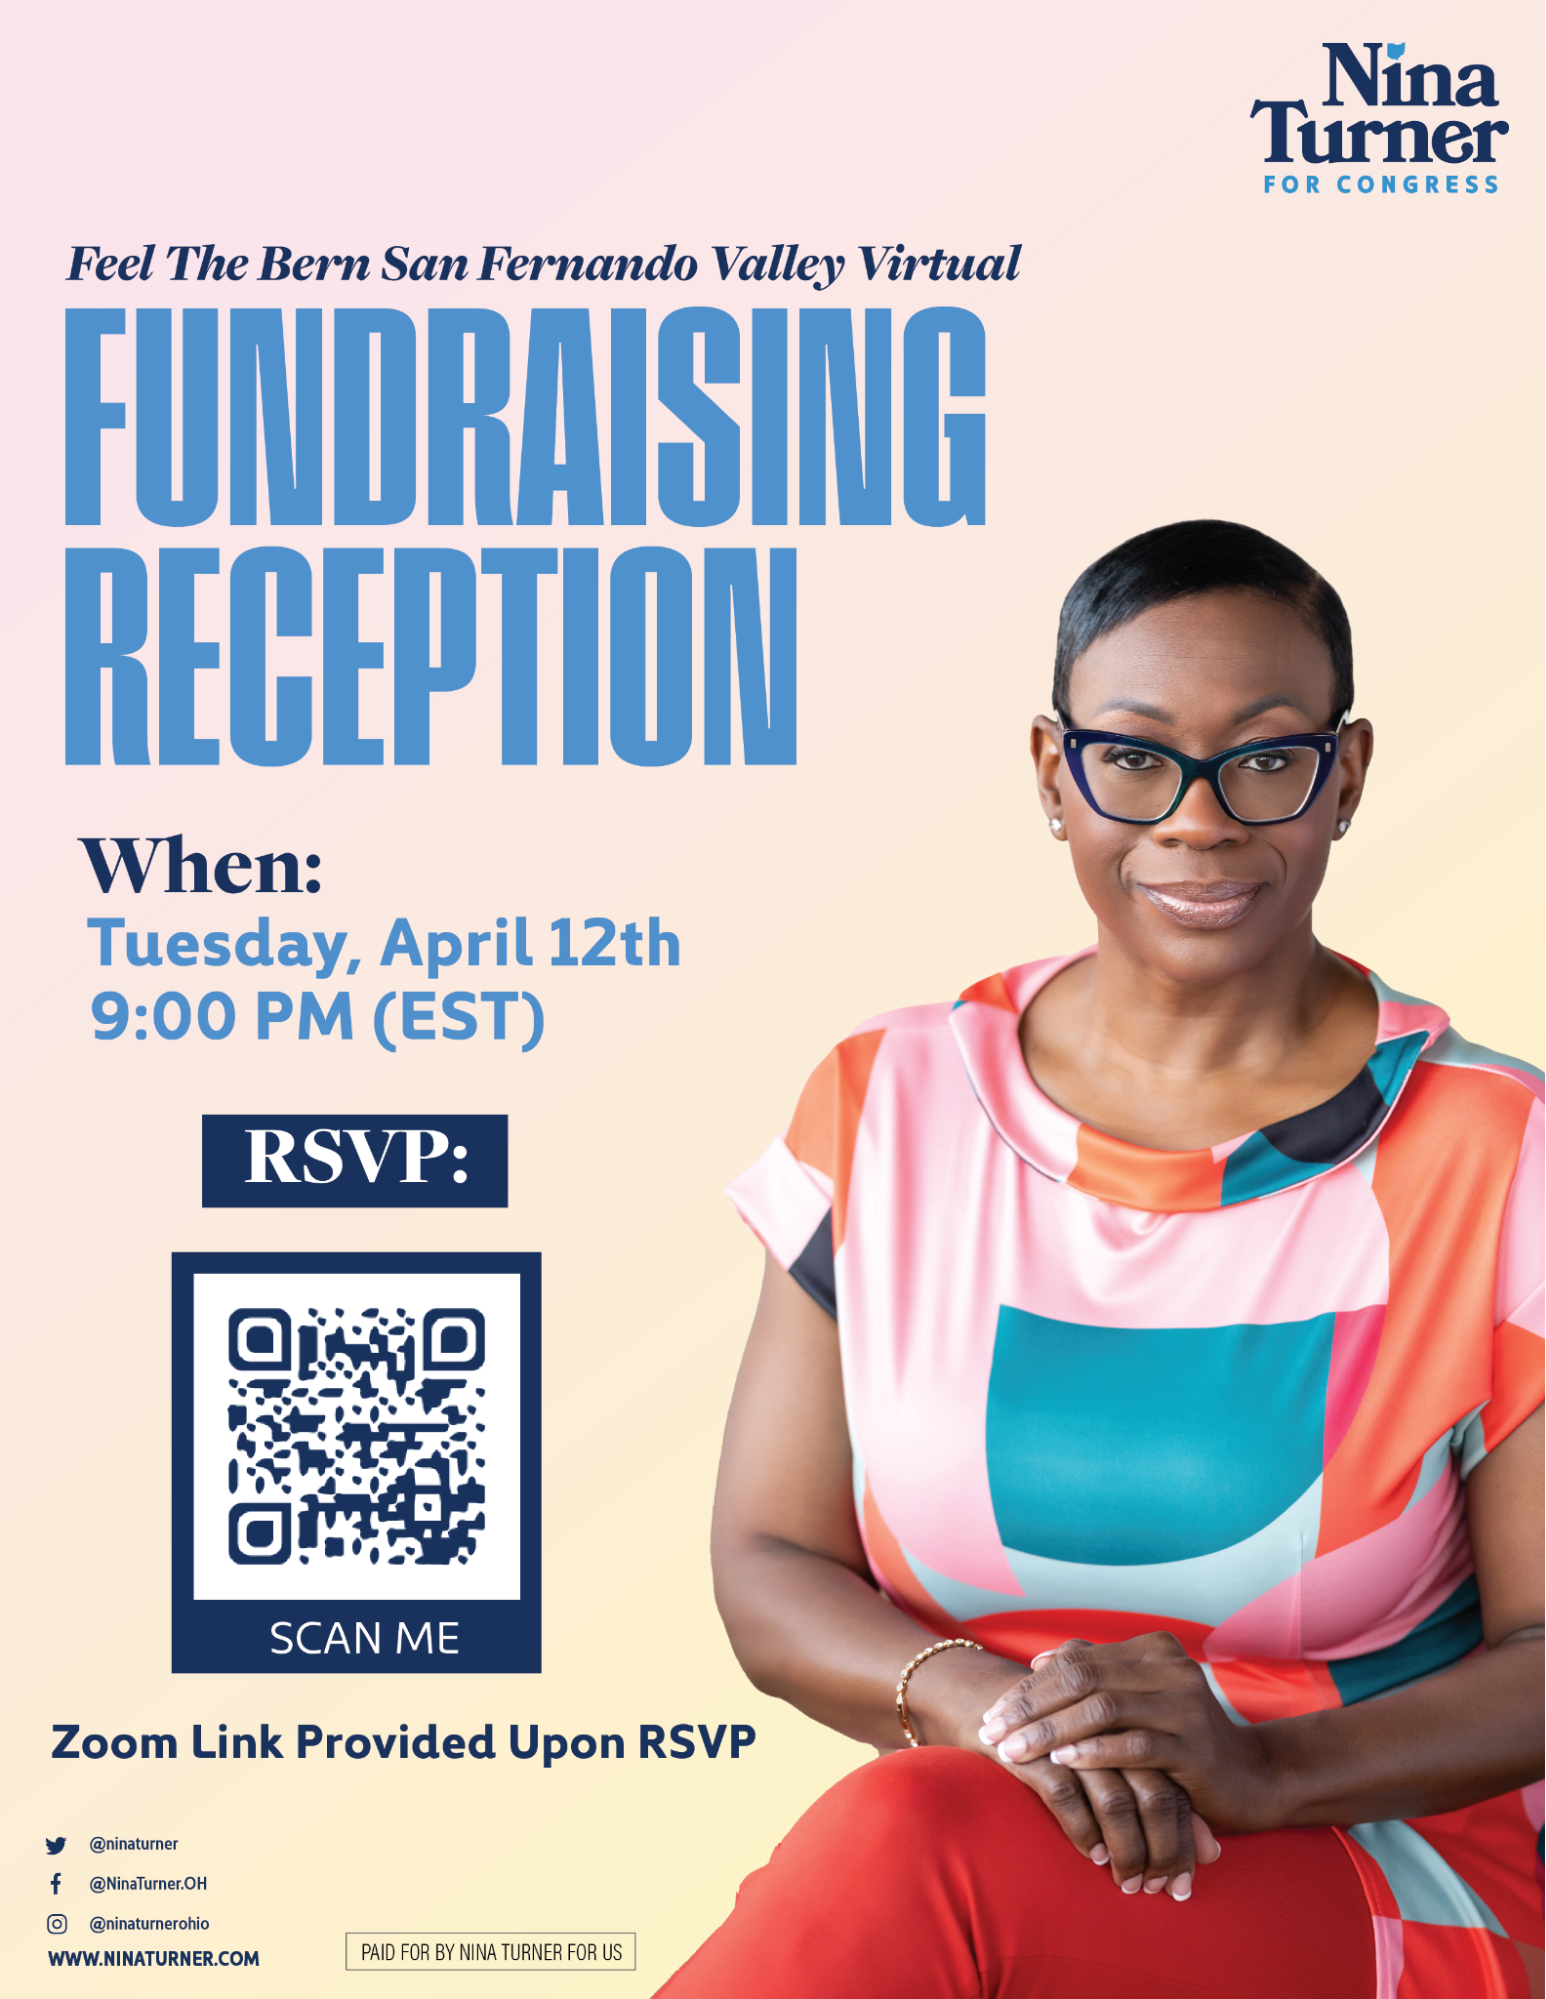 Virtual Fundraising Reception in Honor of Nina Turner for Congress with Feel the Bern San Fernando Valley @ RSVP